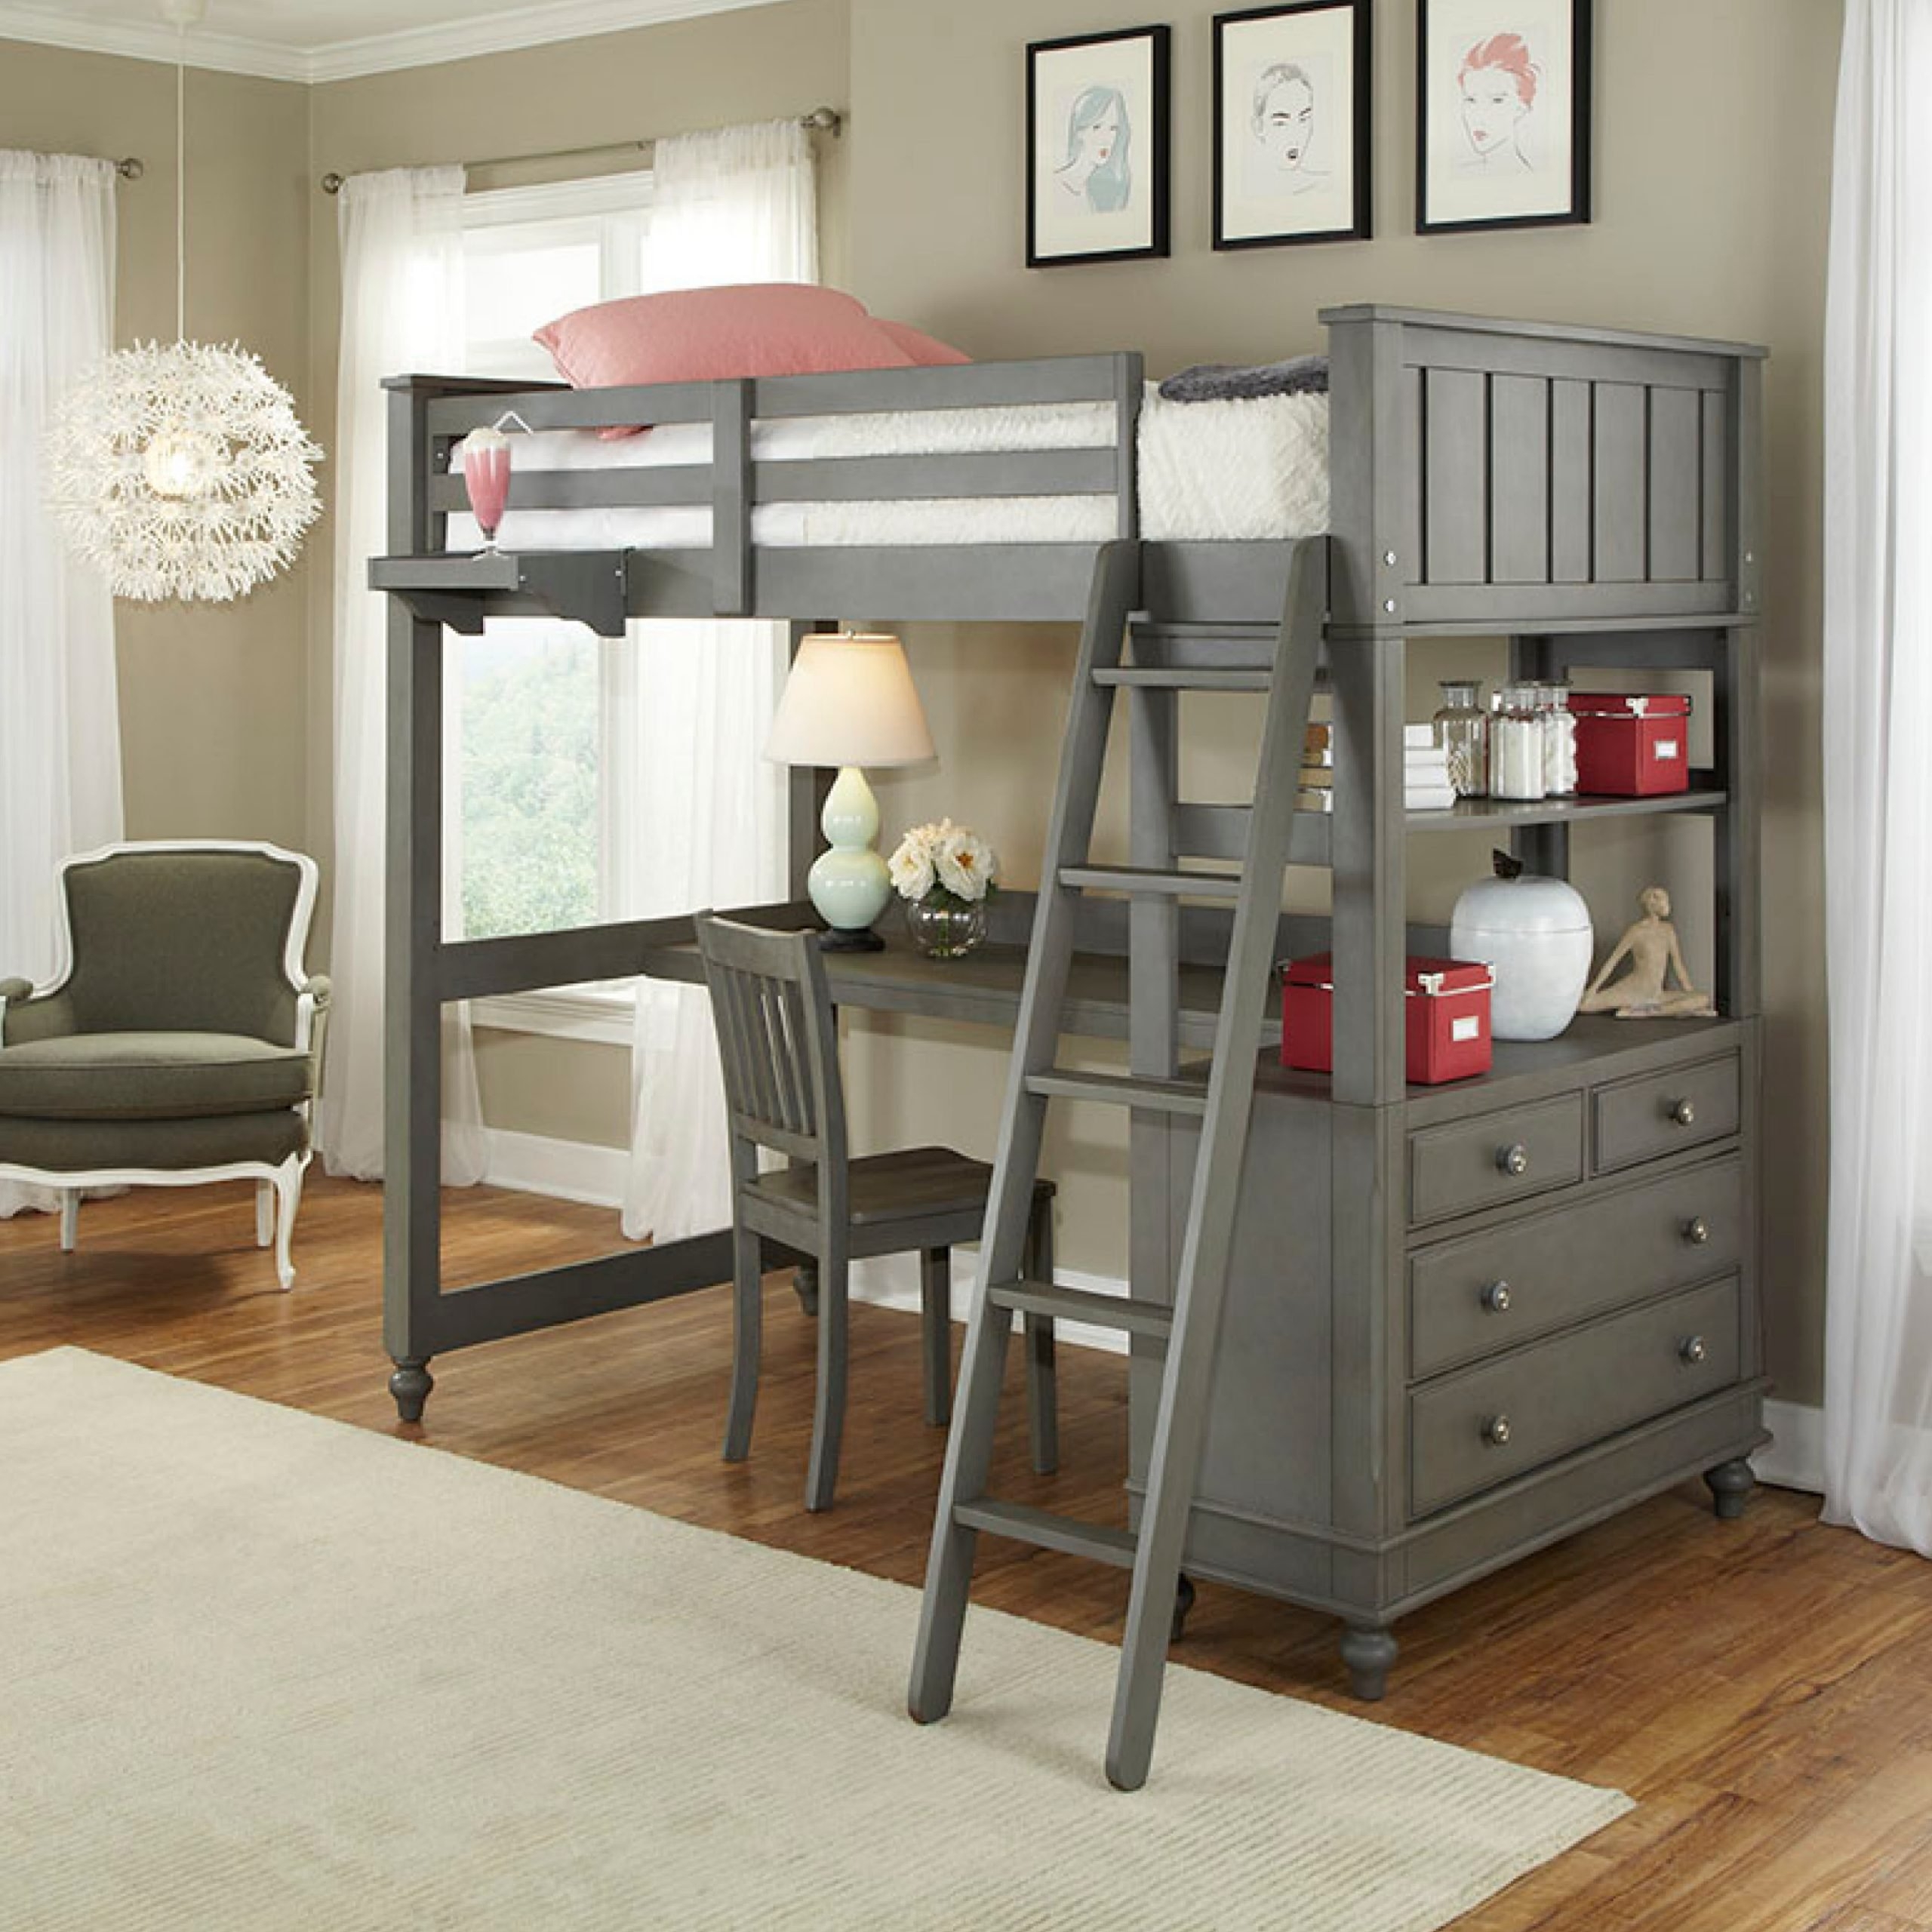 70 in. Twin Loft Bed with Desk